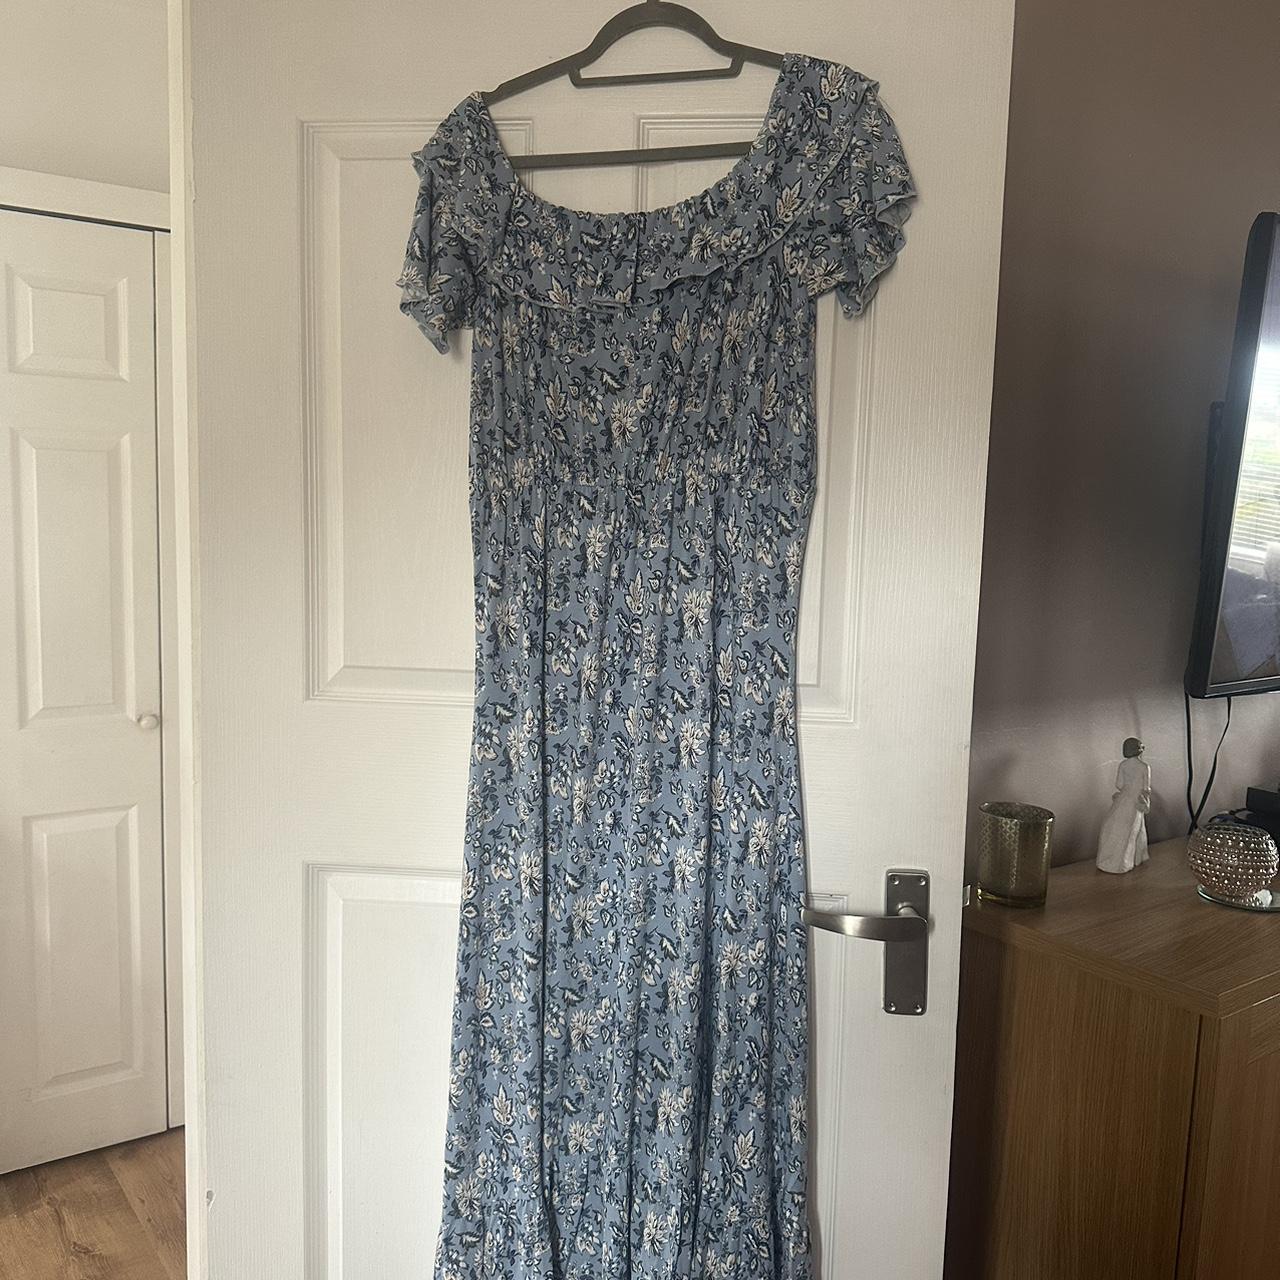 Stacey Solomon In The Style dress size 14 New -... - Depop